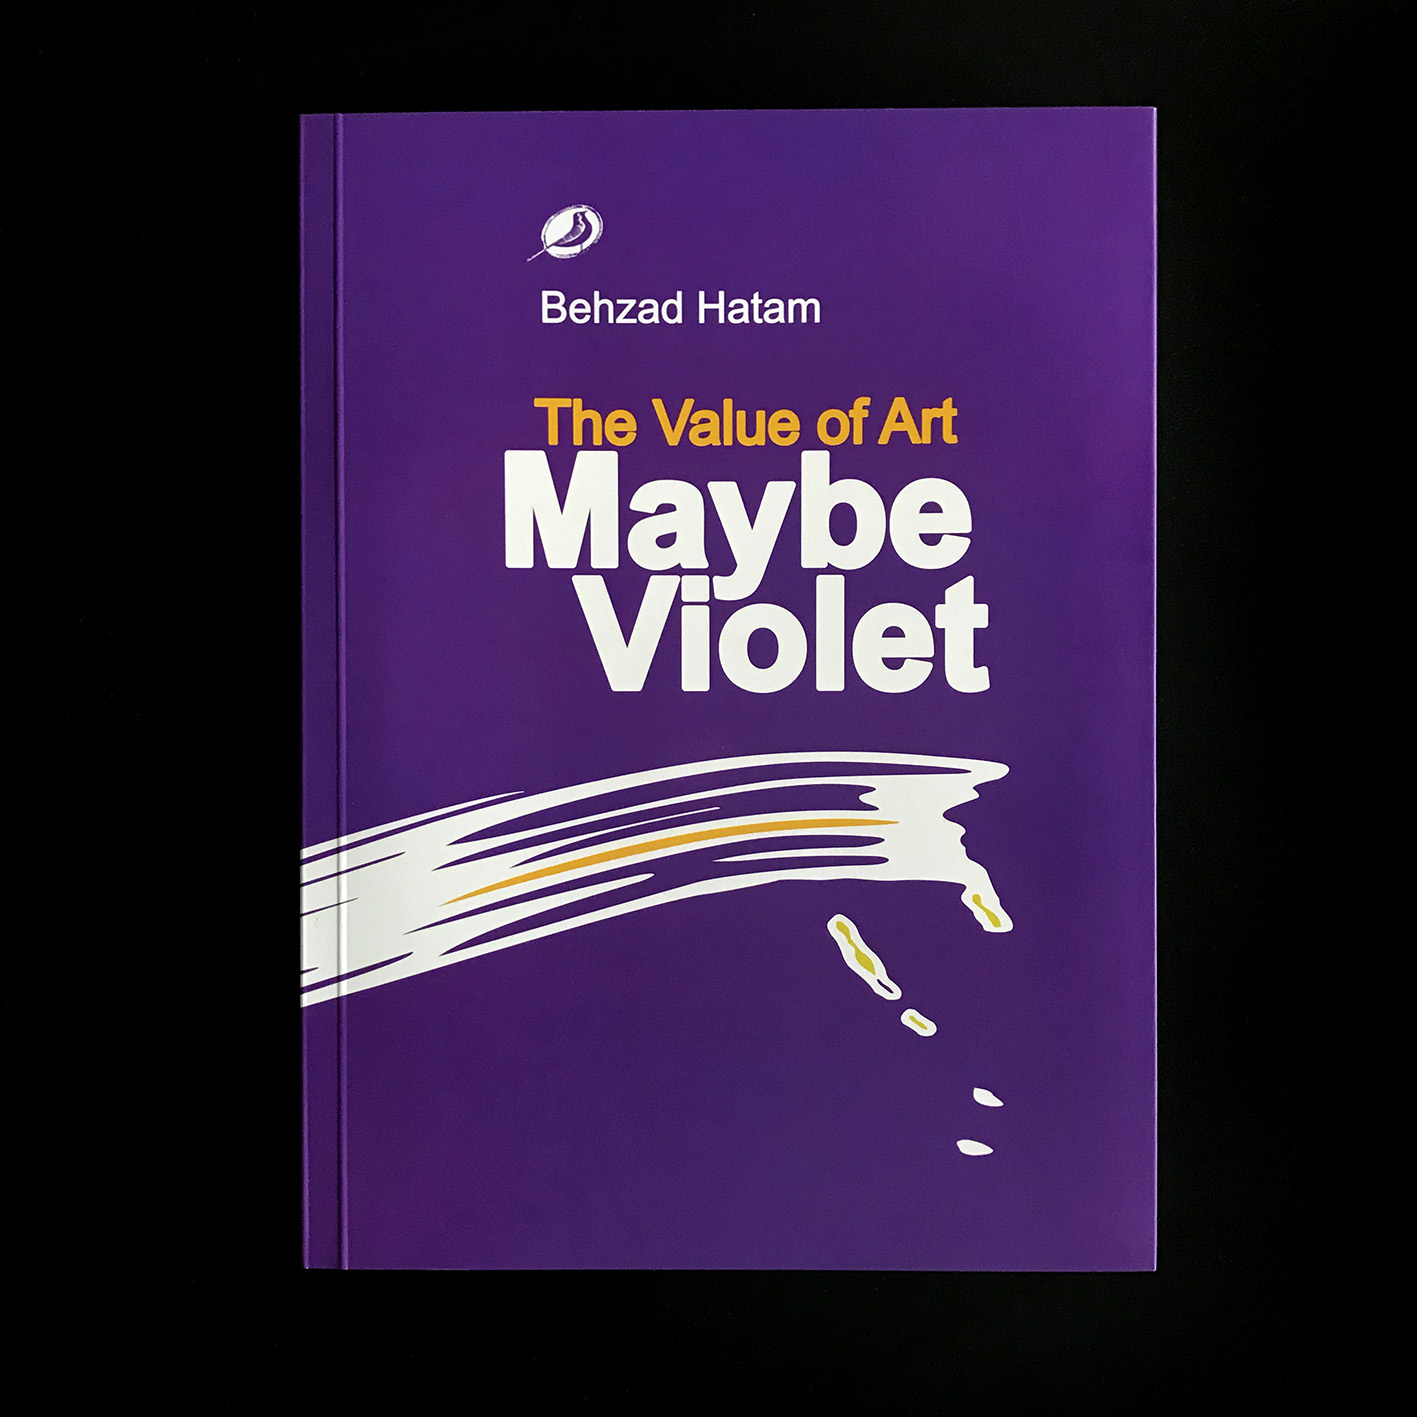 “Maybe Violet” – A book on value of art by Behzad Hatam